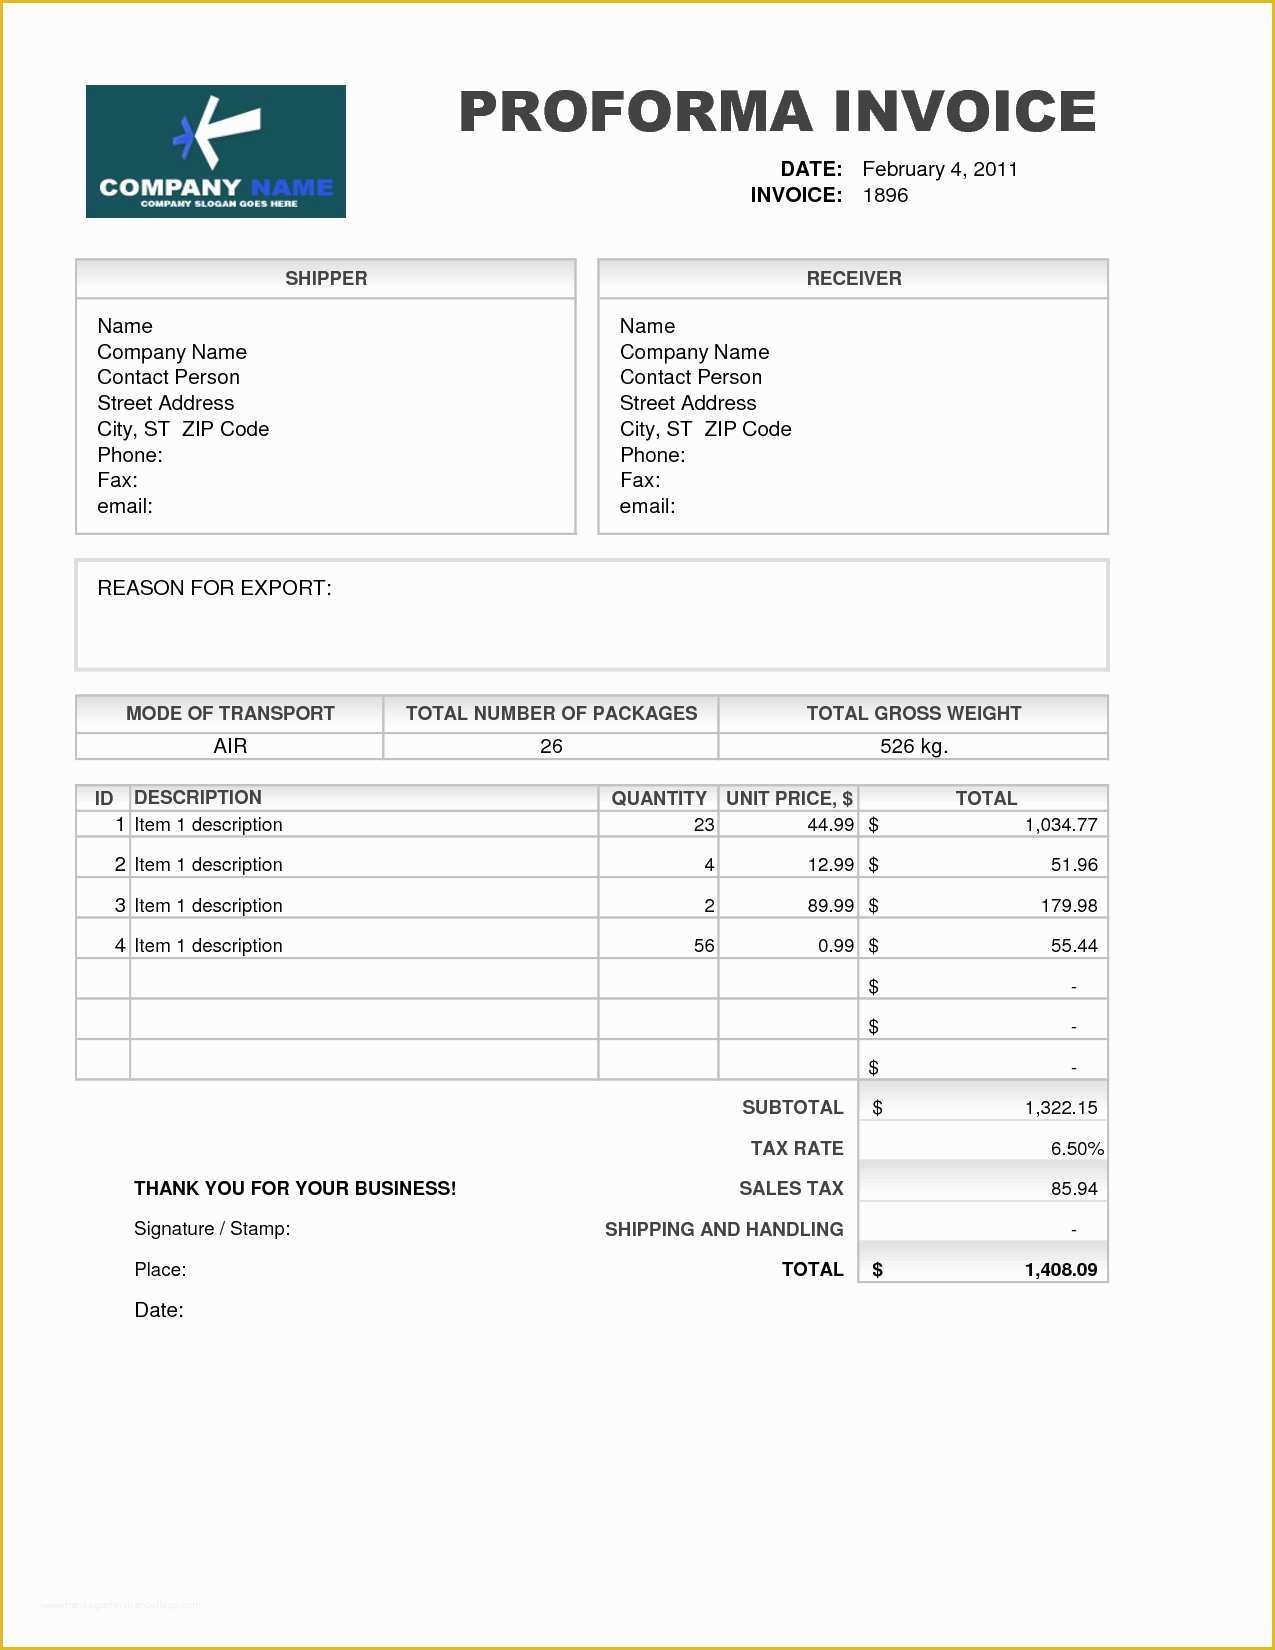 Free Proforma Invoice Template Download Of Proforma Invoice Template Download Free Invoice Template